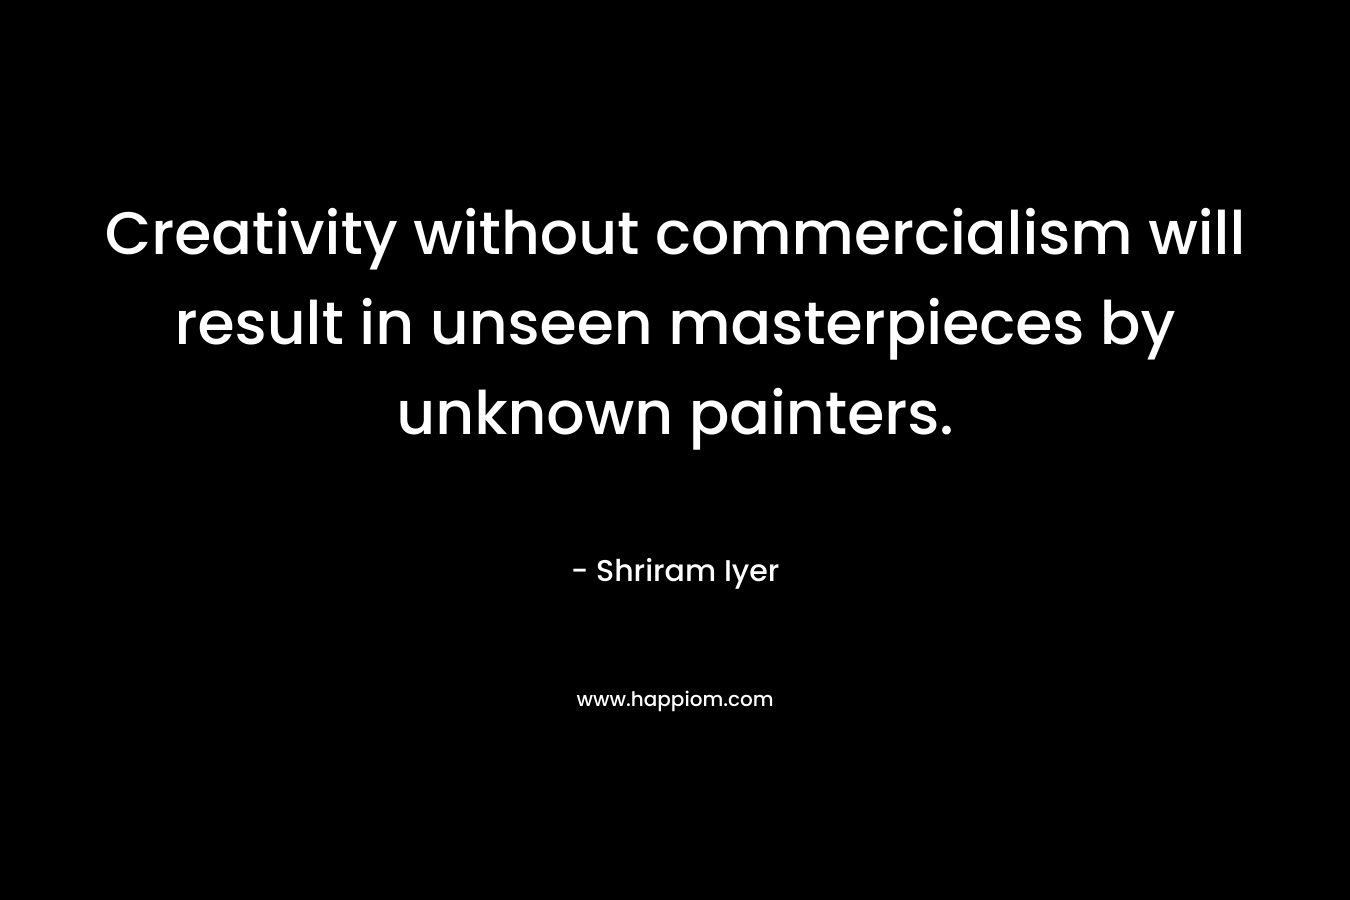 Creativity without commercialism will result in unseen masterpieces by unknown painters.